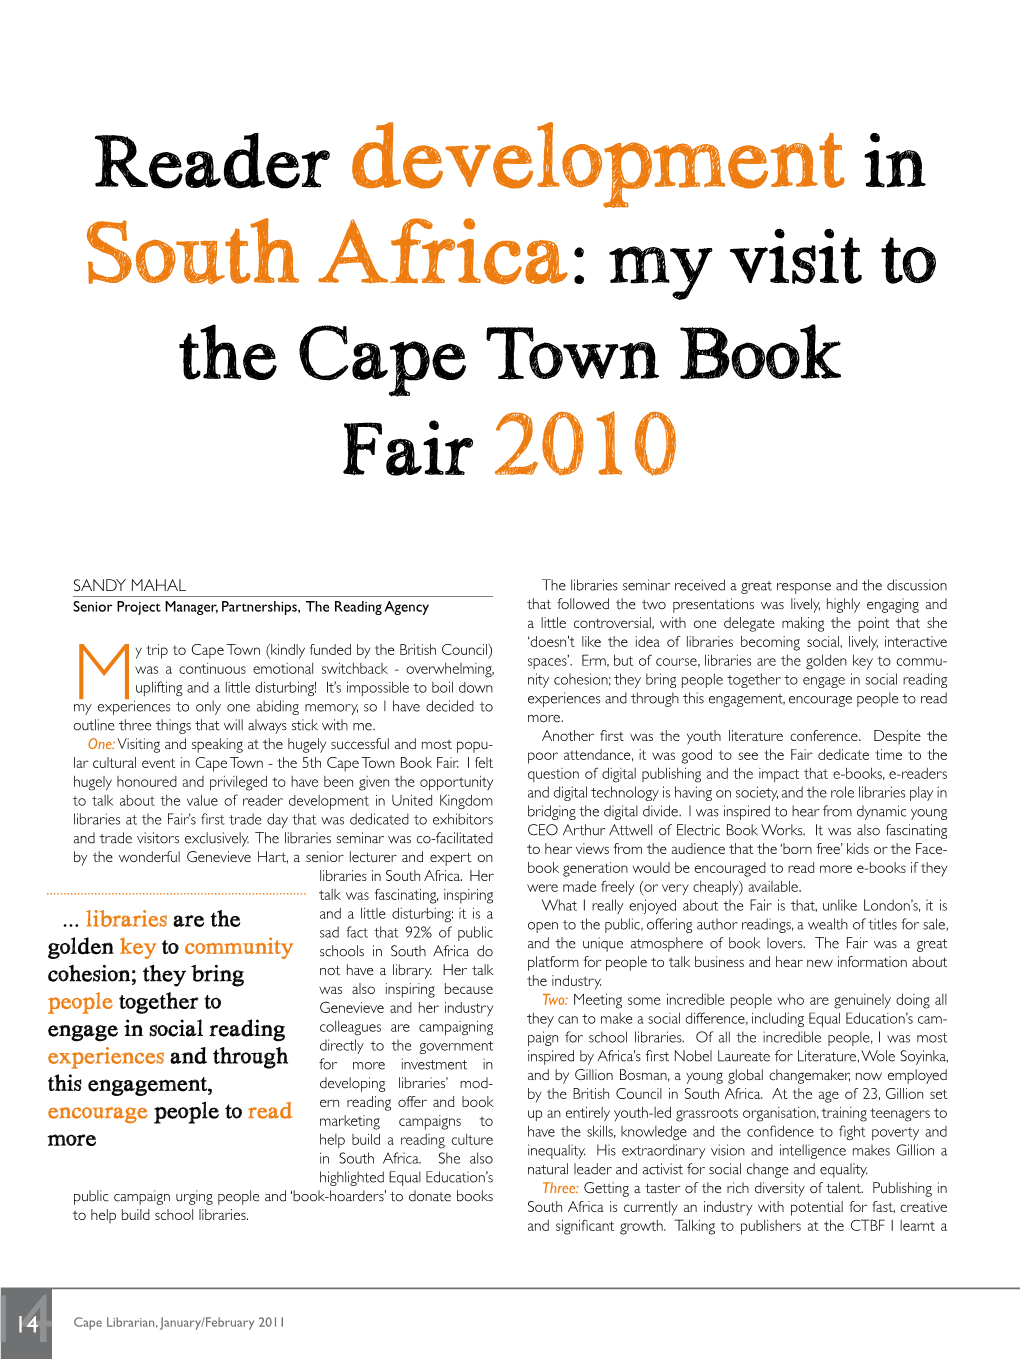 Reader Development in South Africa: My Visit to the Cape Town Book Fair 2010